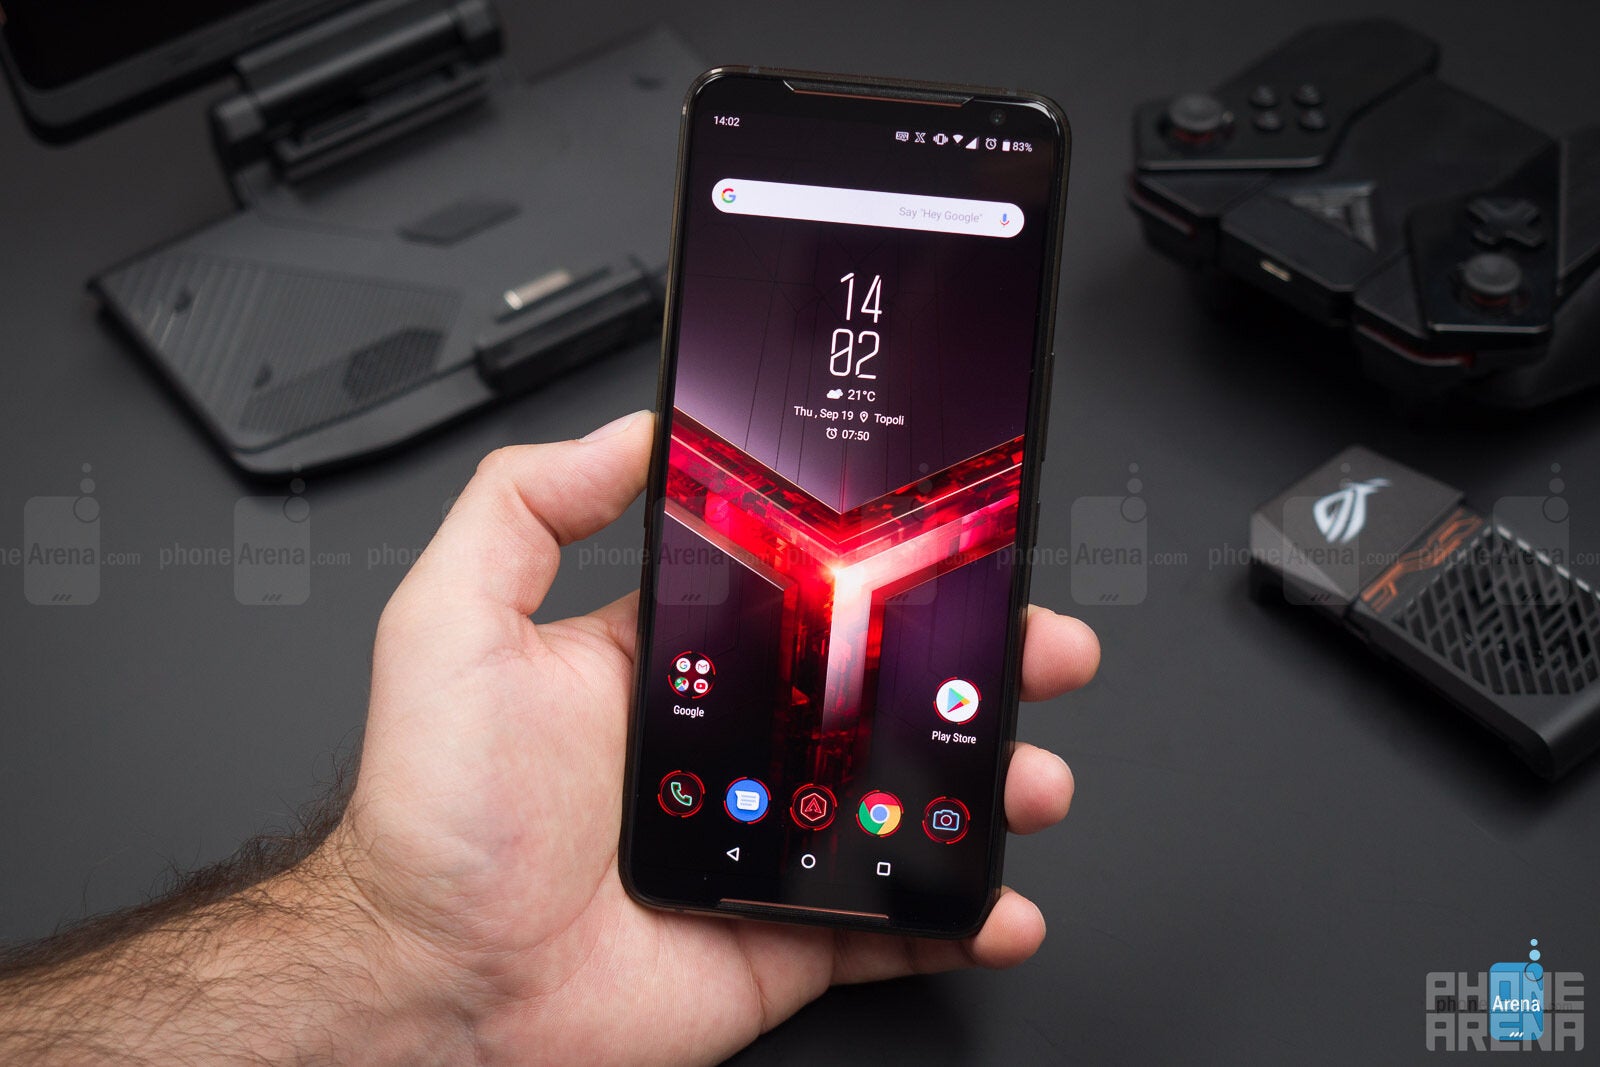 ASUS ROG Phone II Smartphone with a Snapdragon 855+ processor